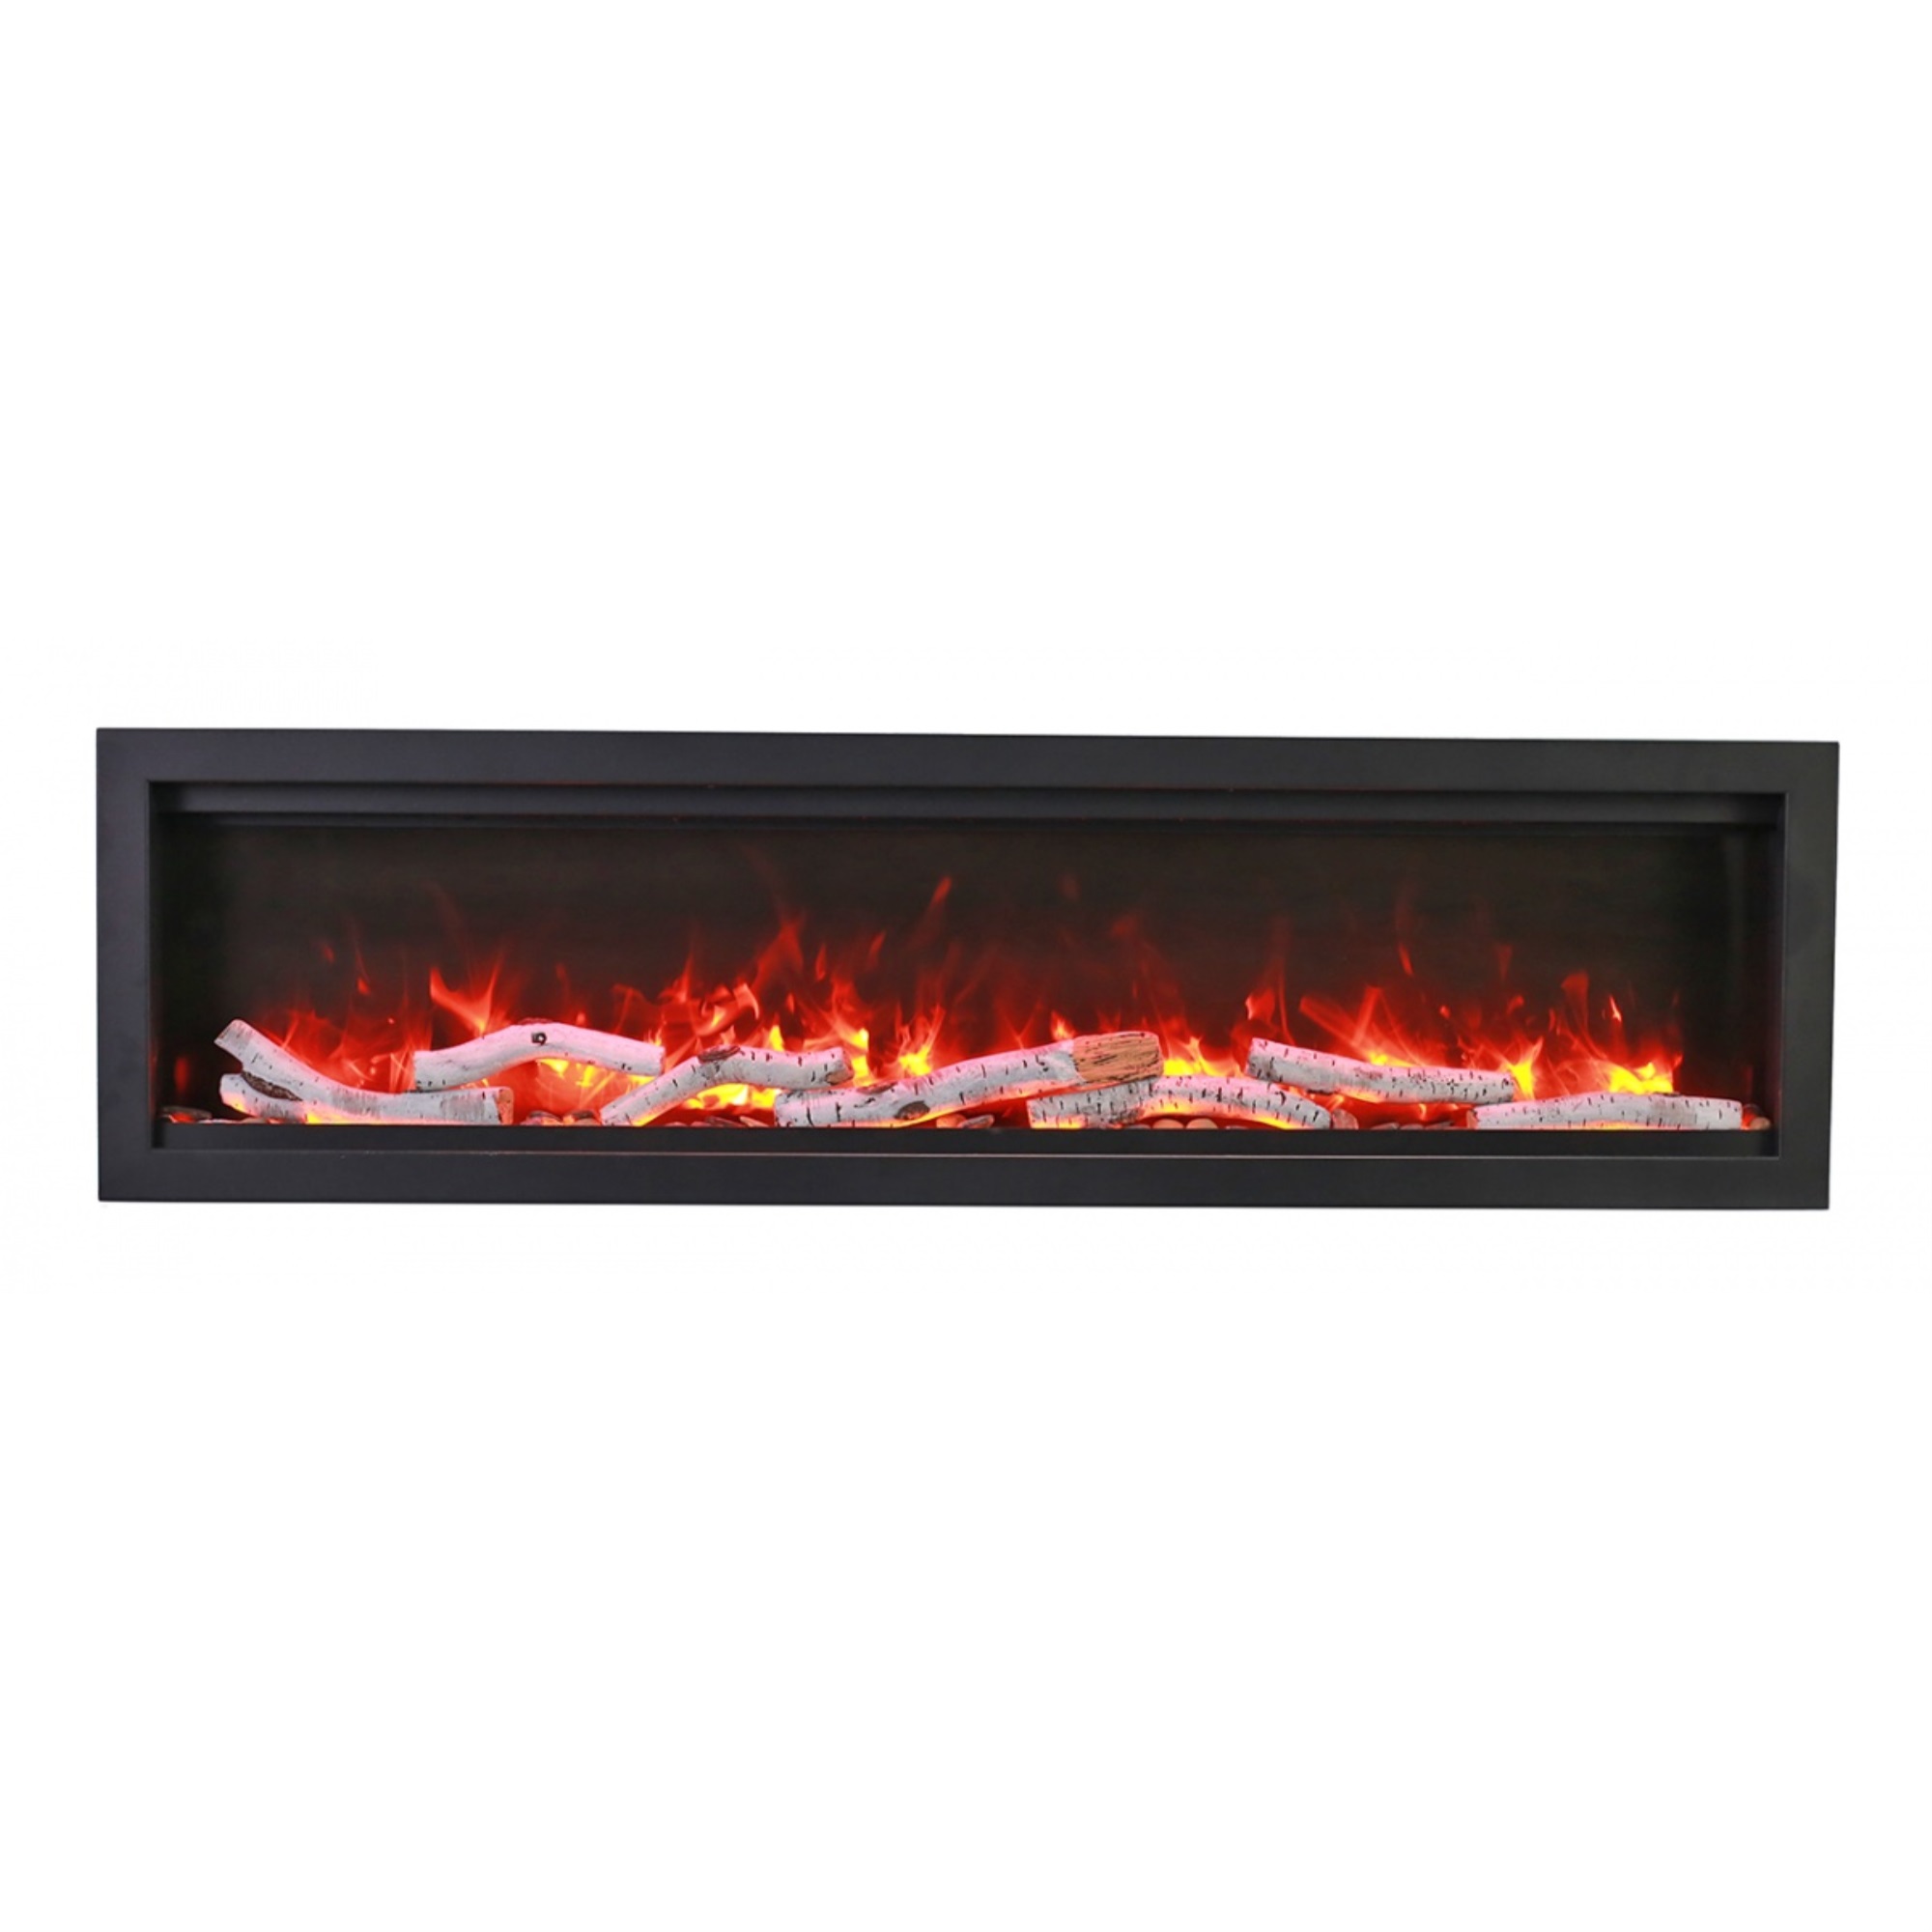 Amantii 50" Clean face Electric Built-in with log and glass, black steel surround